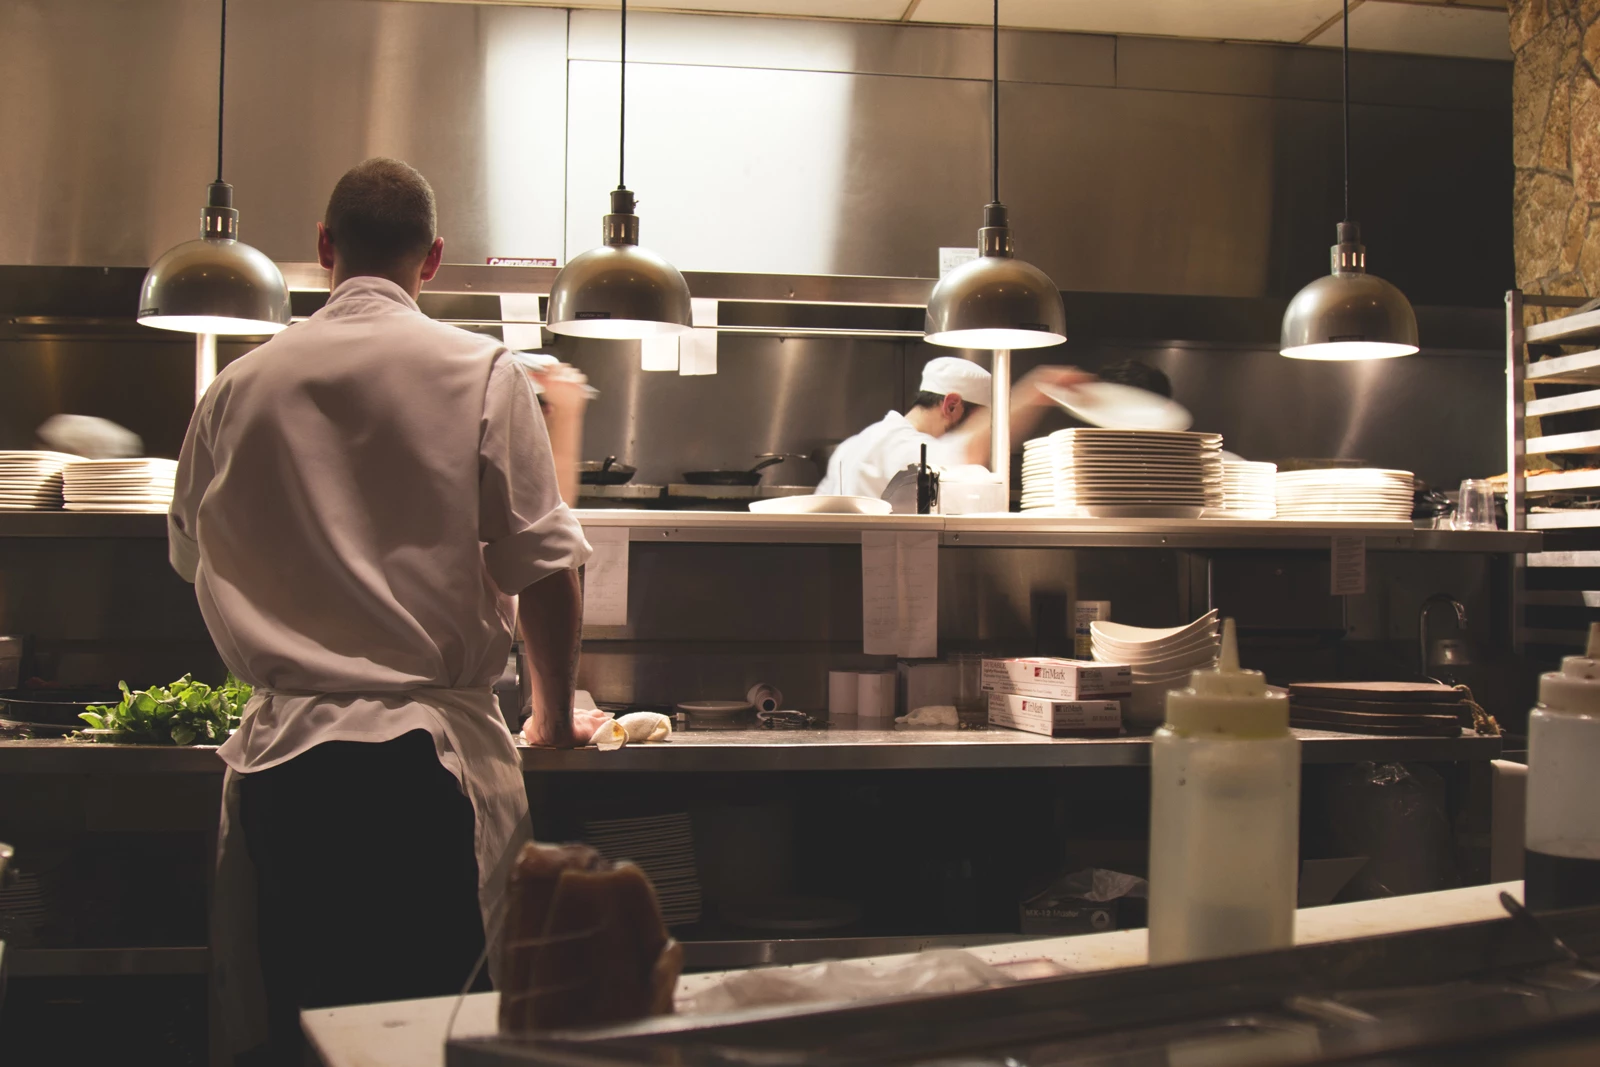 A busy kitchen in a restaurant